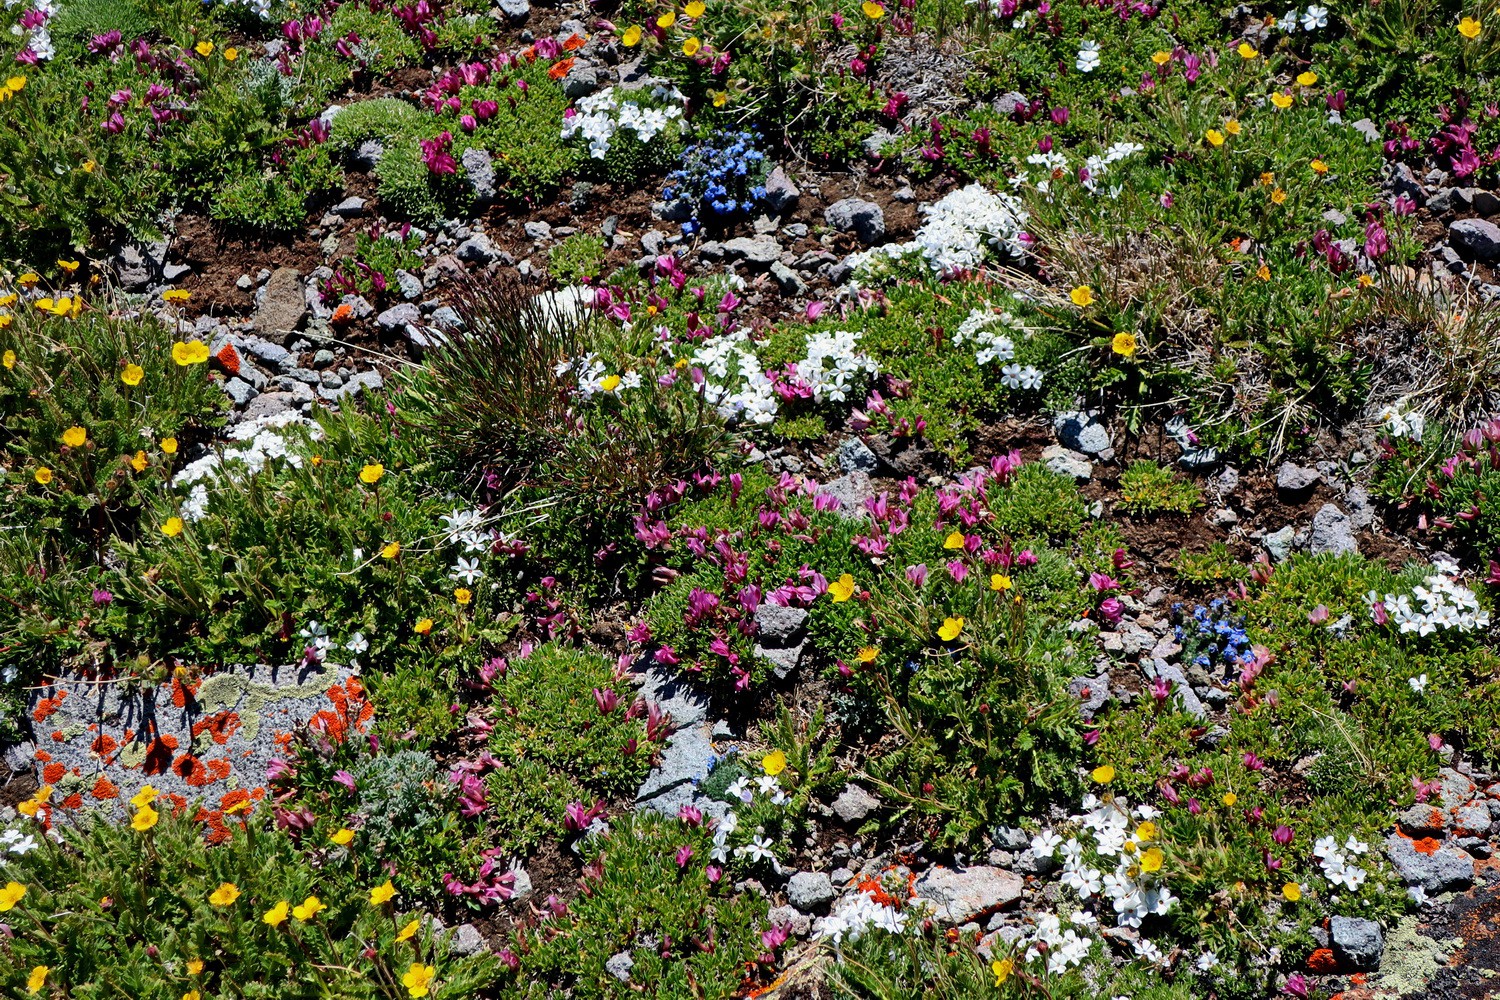 Flowers close to the summit at 3600 meters sea-level